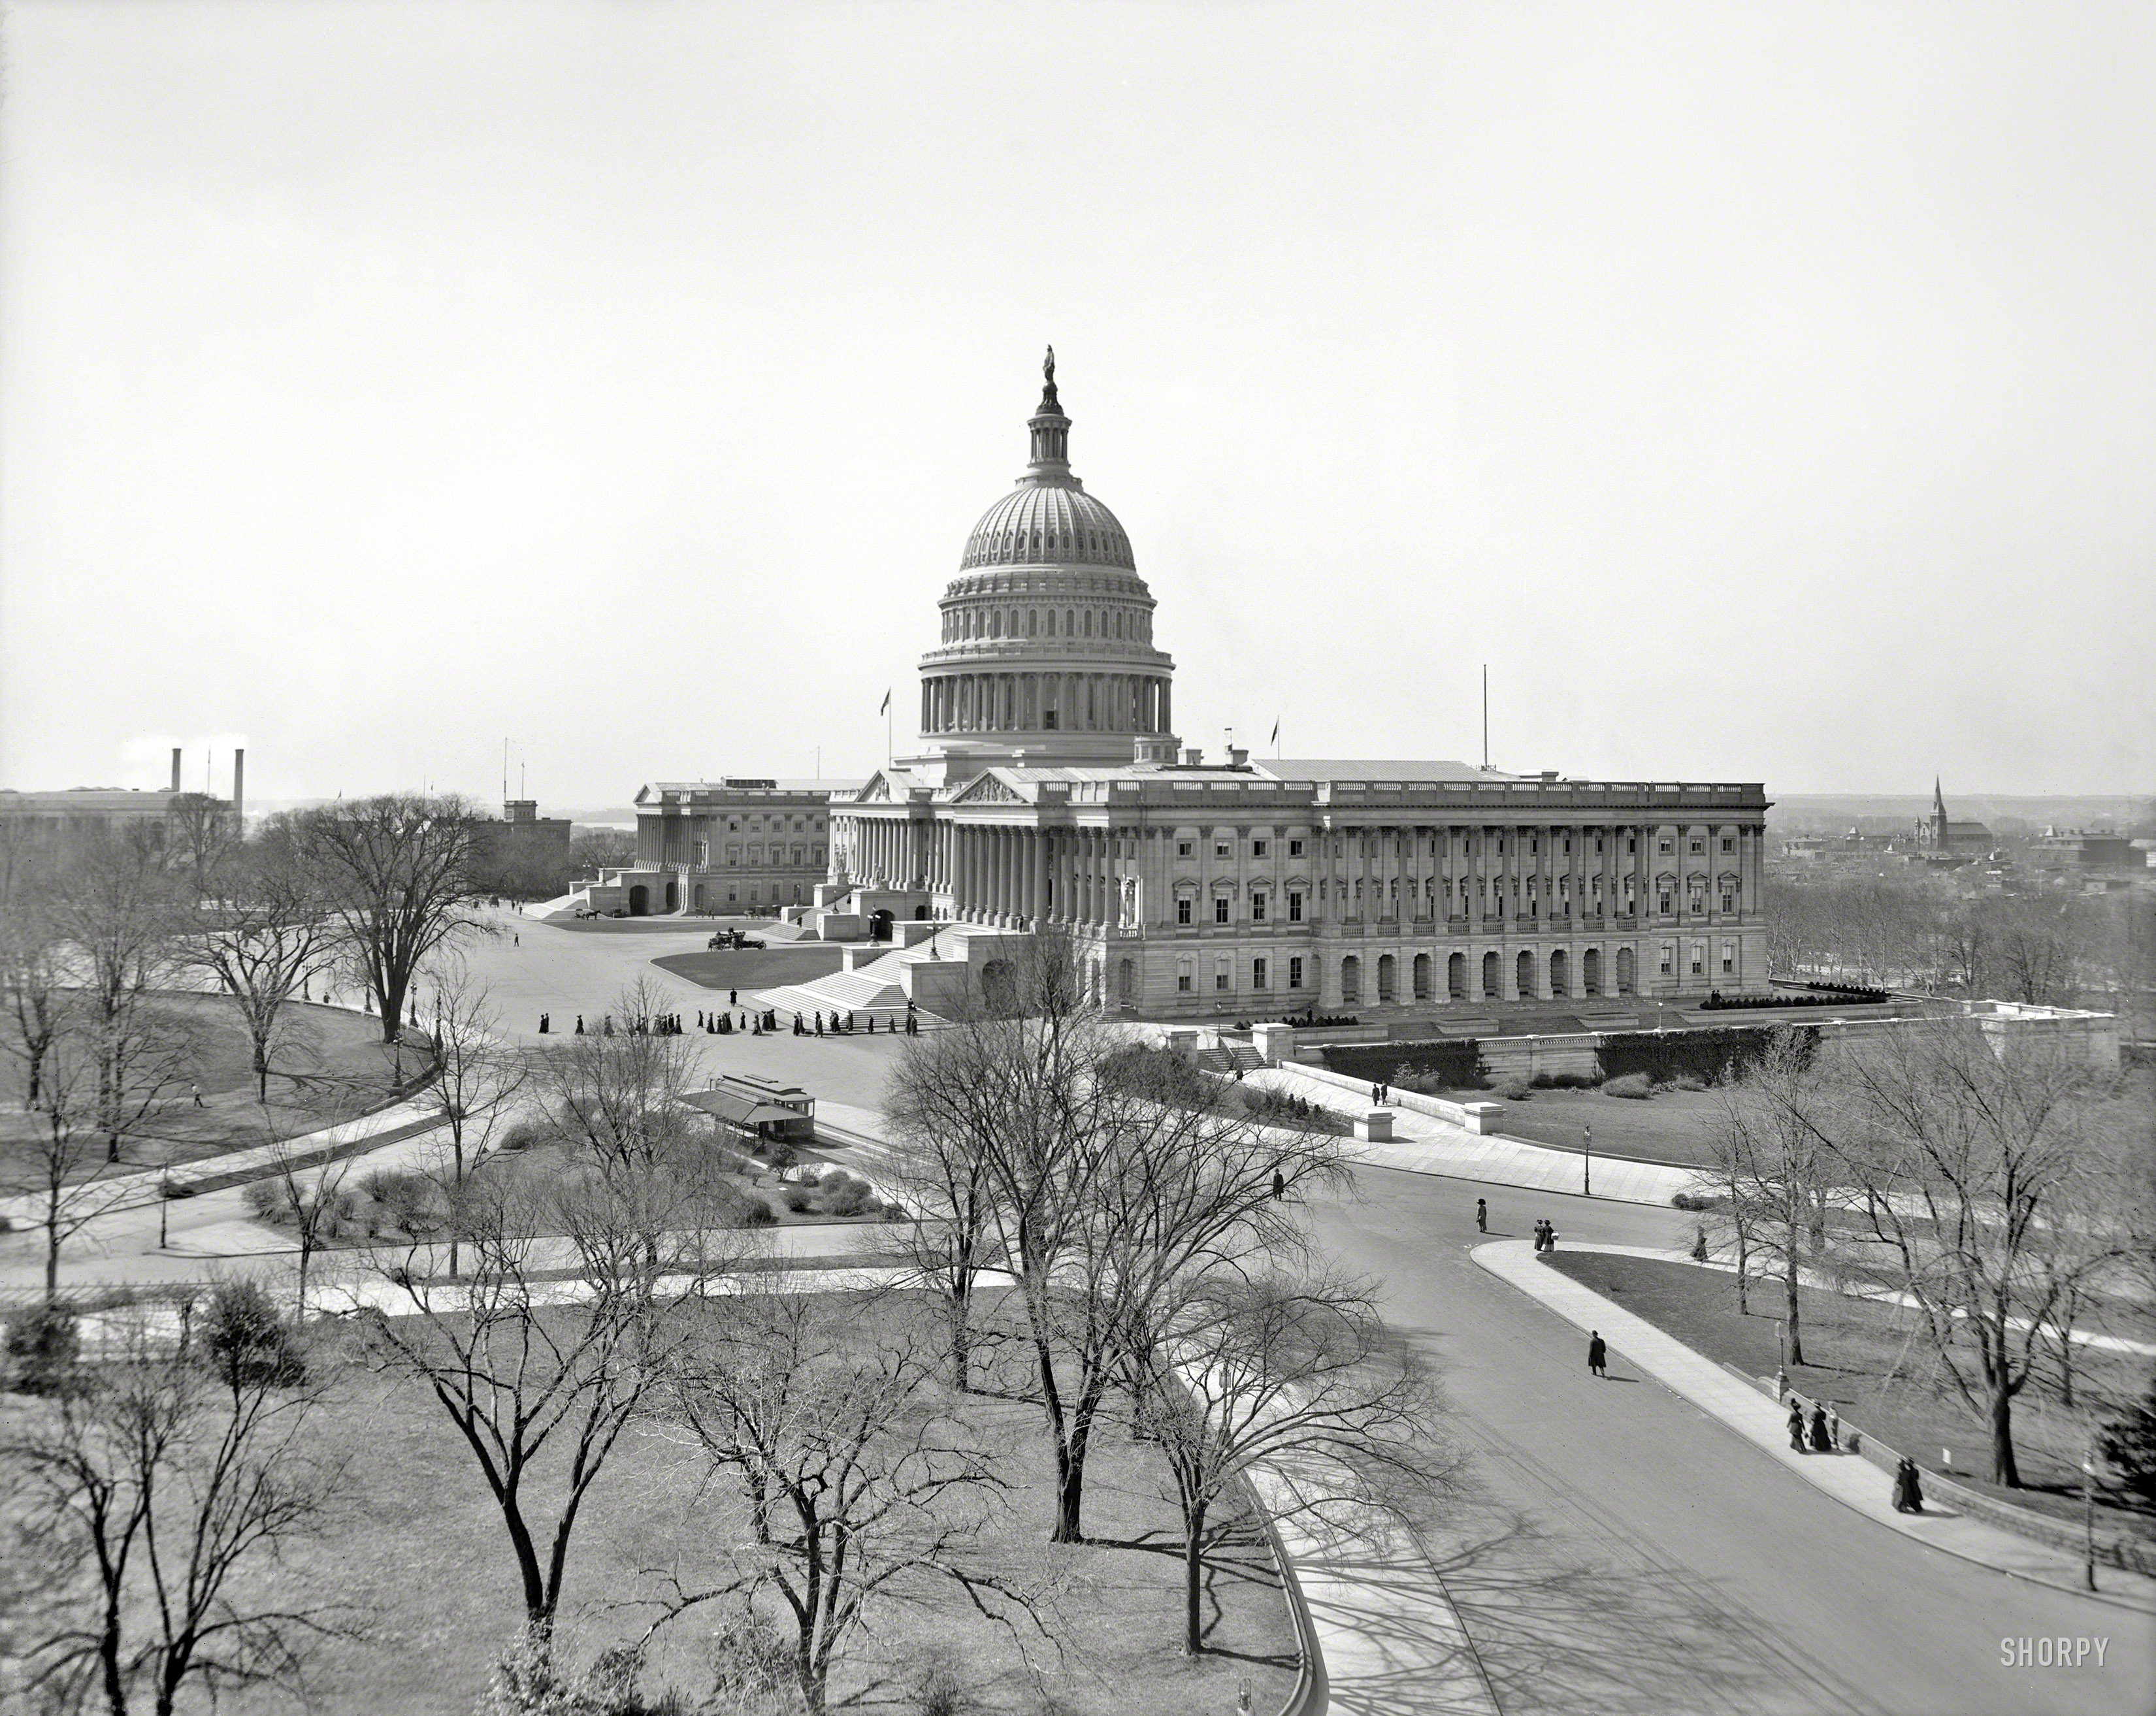 Circa 1908. "North view of United States Capitol, Washington, D.C." 8x10 inch dry plate glass negative, Detroit Publishing Company. View full size.